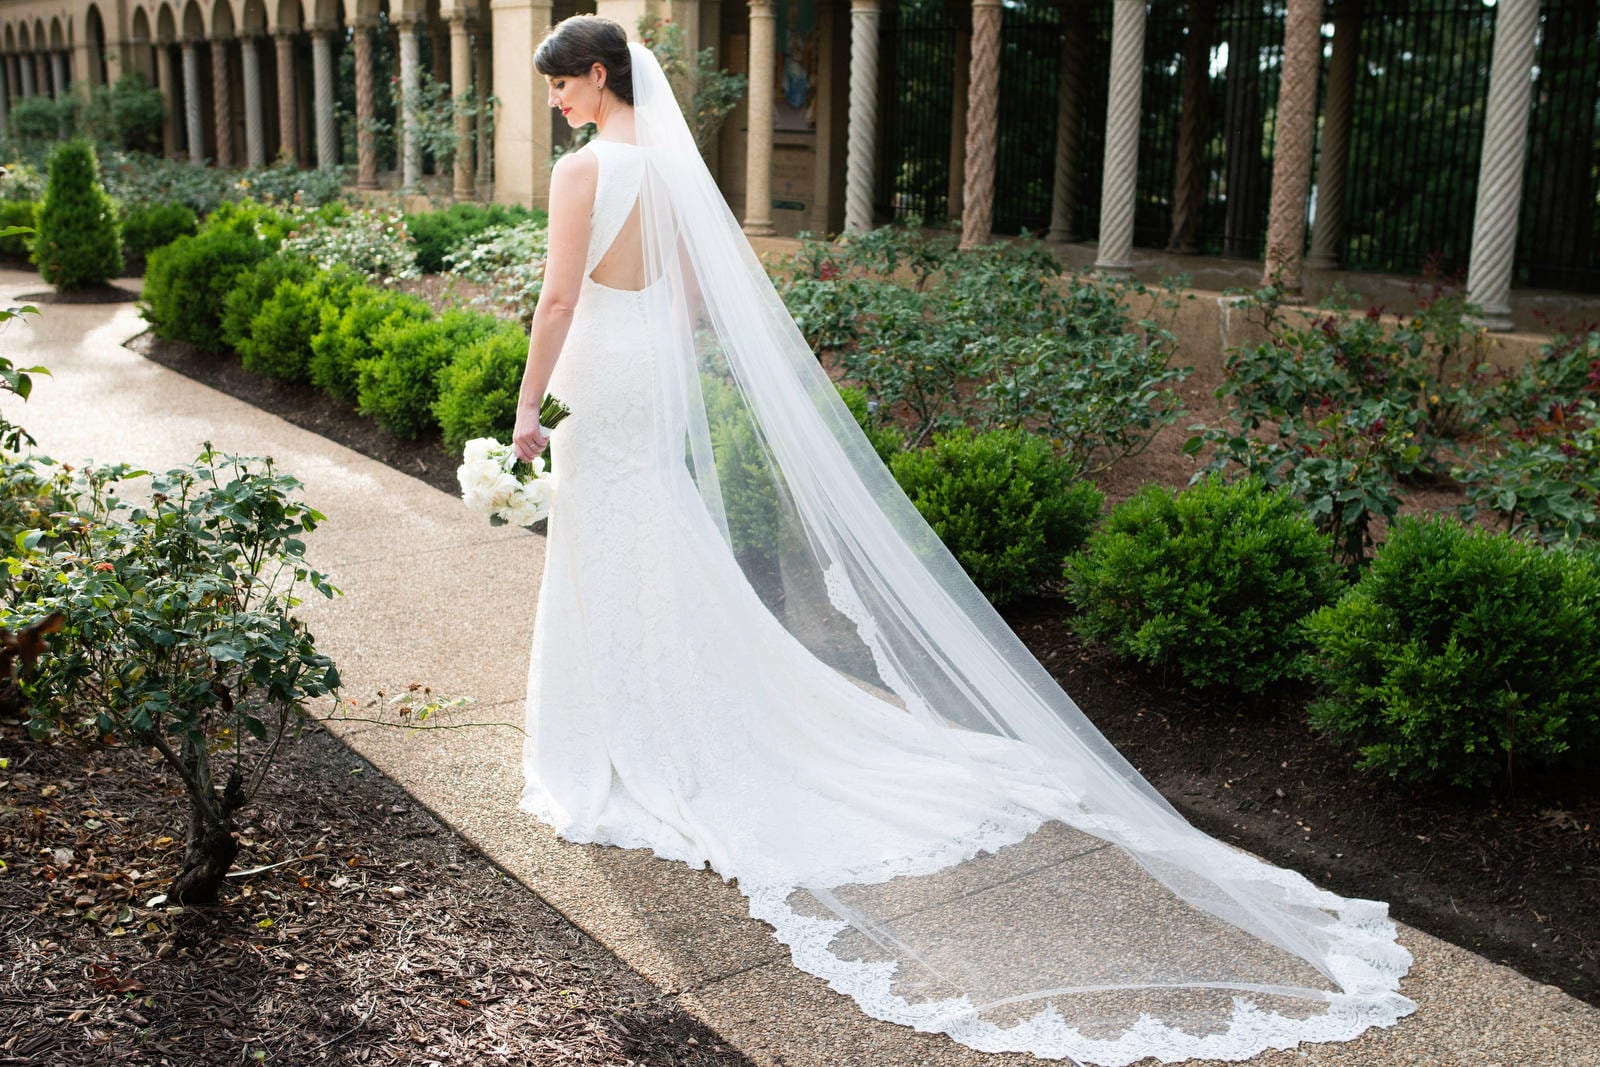 A bride looks back over her shoulder as she stands on a path with her veil and dress train spread out behind her.